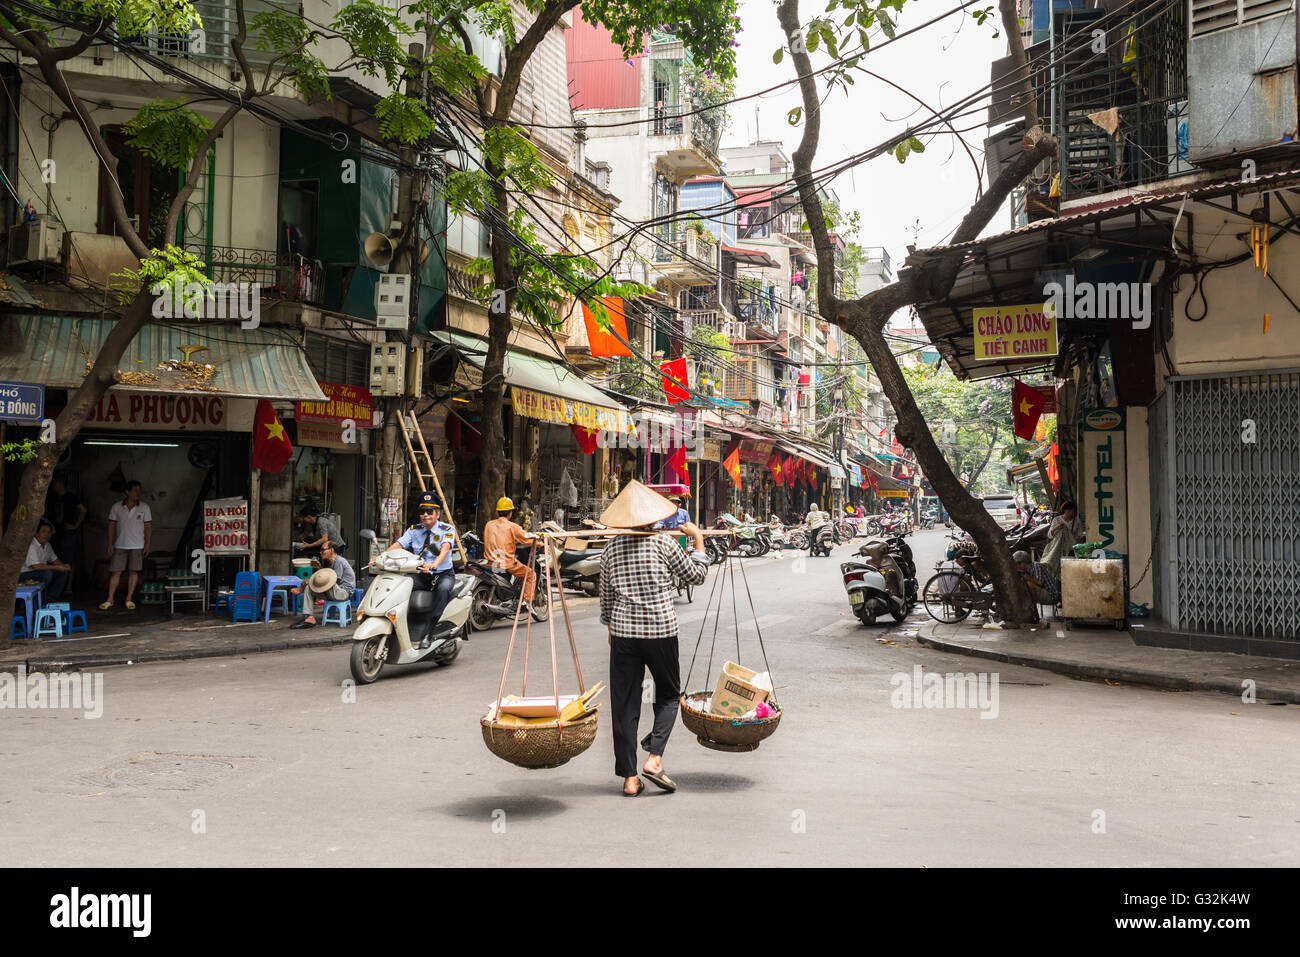 Street vendor transporting goods in baskets using a carrying pole in Hanoi's Old Quarter. Stock Photo